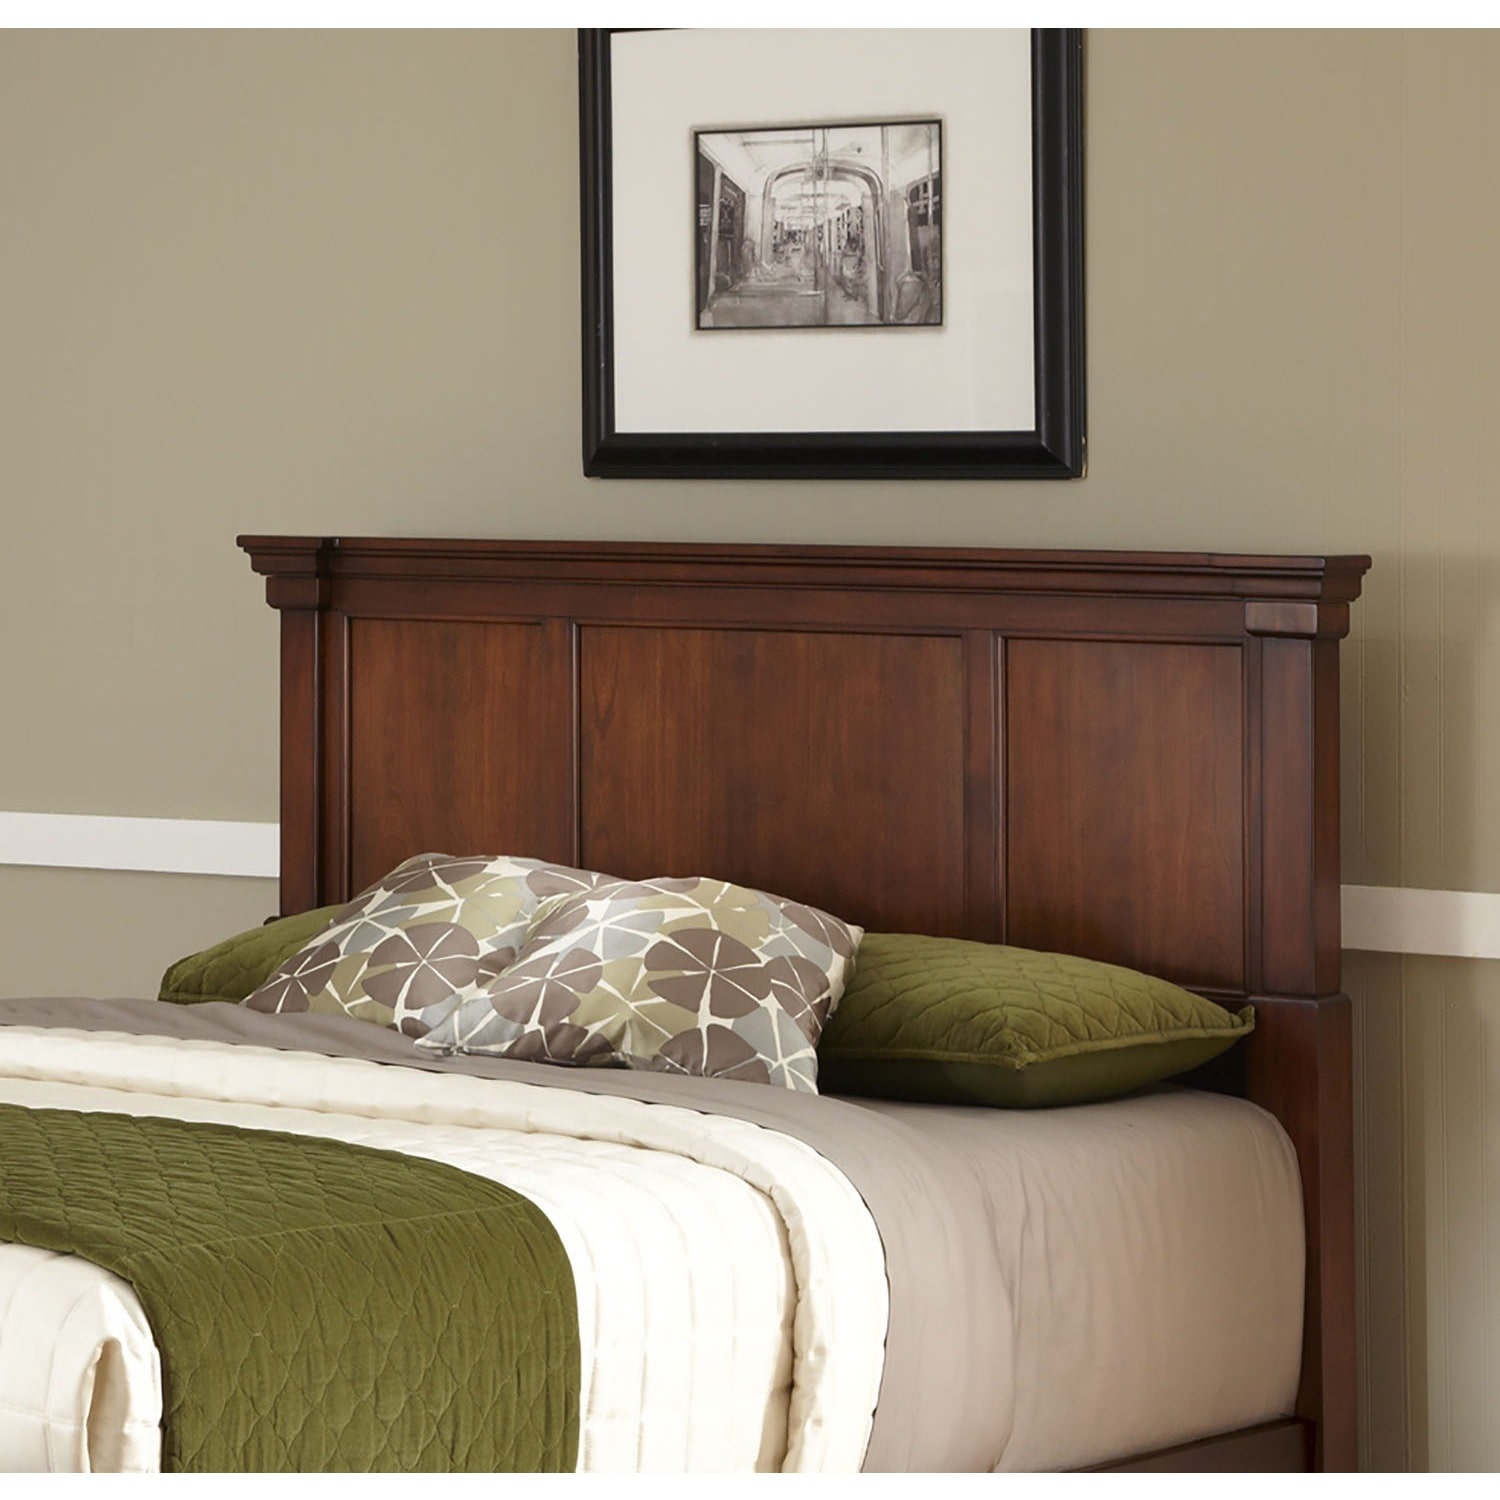 Give a royal look to bedroom with a king
headboard